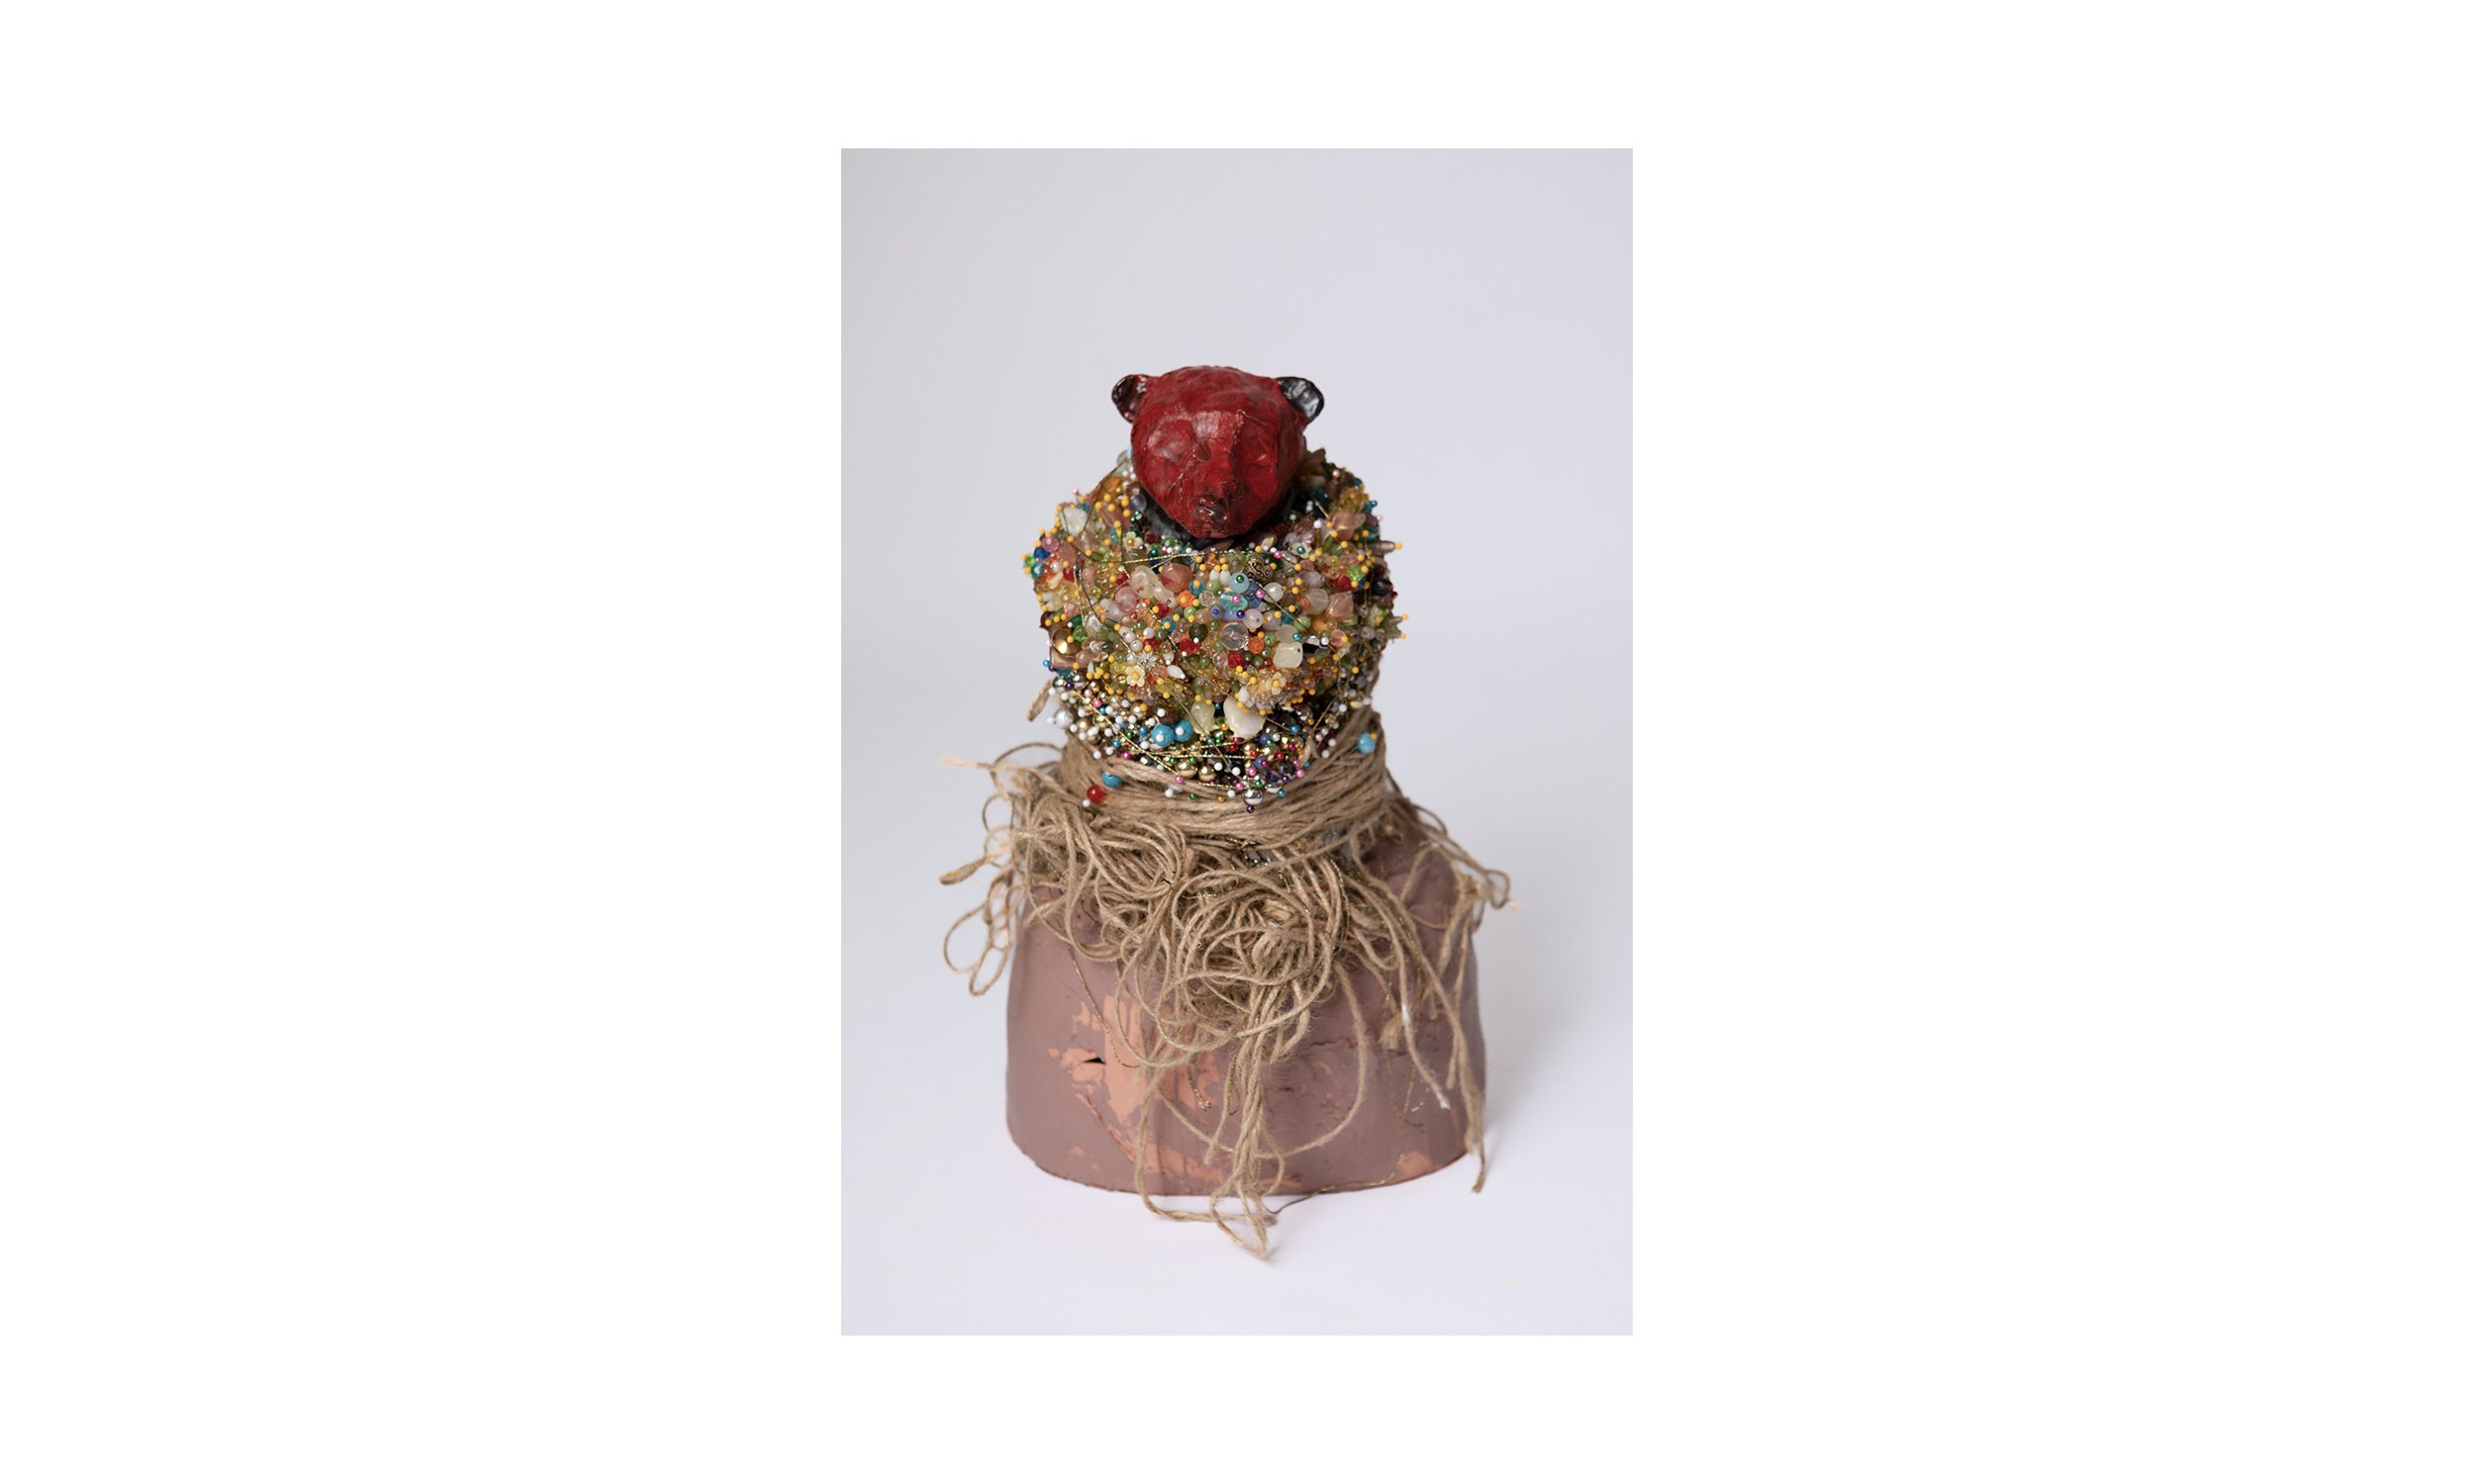   Untitled,  beads, glue, pins, twine, clay, paint ,  approx. 10W x 10H x 8.5D”, $2600  